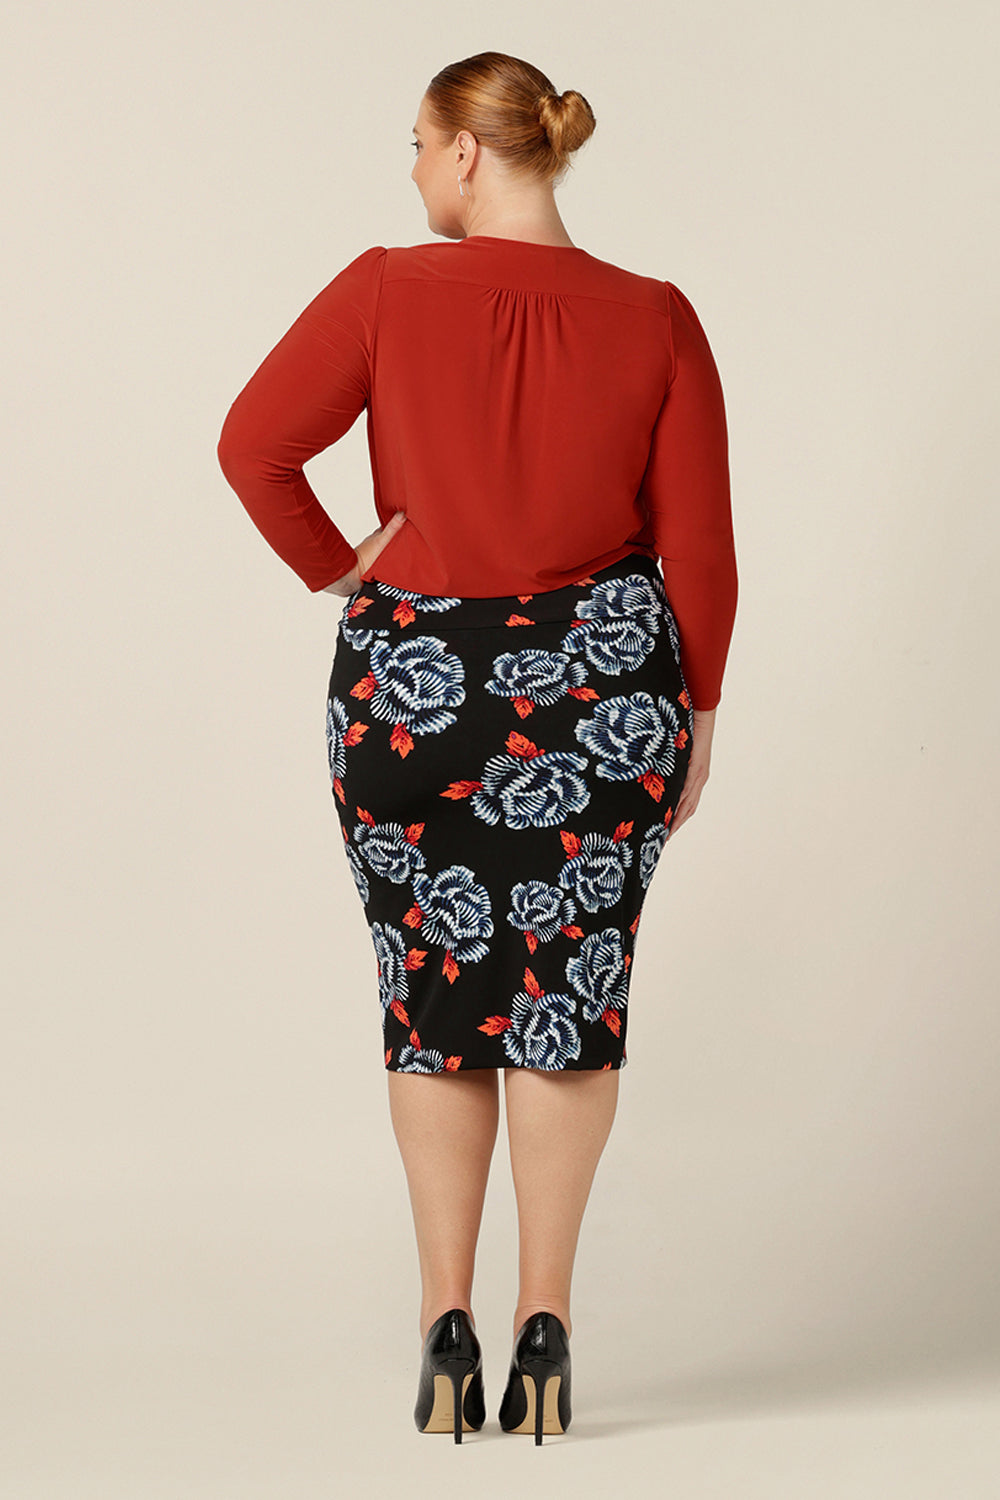 A great skirt for work and corporate wear, the Andi Skirt in Ikebana is a tube skirt in stretch jersey fabric. Australian-made by Australia and New Zealand women's clothing brand, L&F, this black skirt has a blue and orange floral pattern. This modern print skirt matches well with black and navy tops and jackets. Shop this skirt in an inclusive size range of 8-24. 